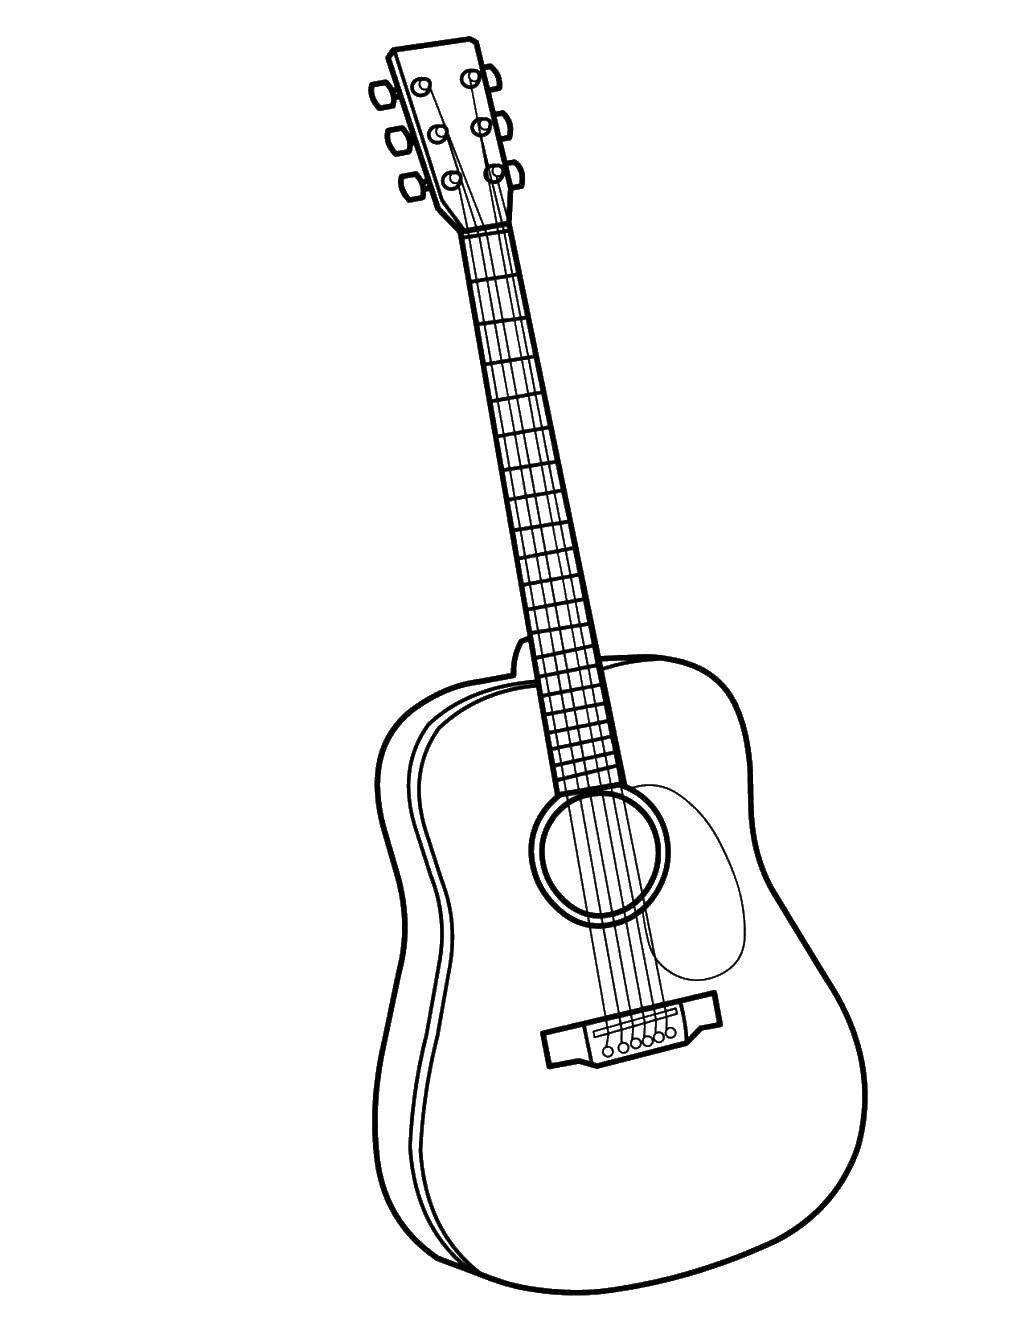 Coloring The guitars. Category Music. Tags:  Music, instrument, musician, note.